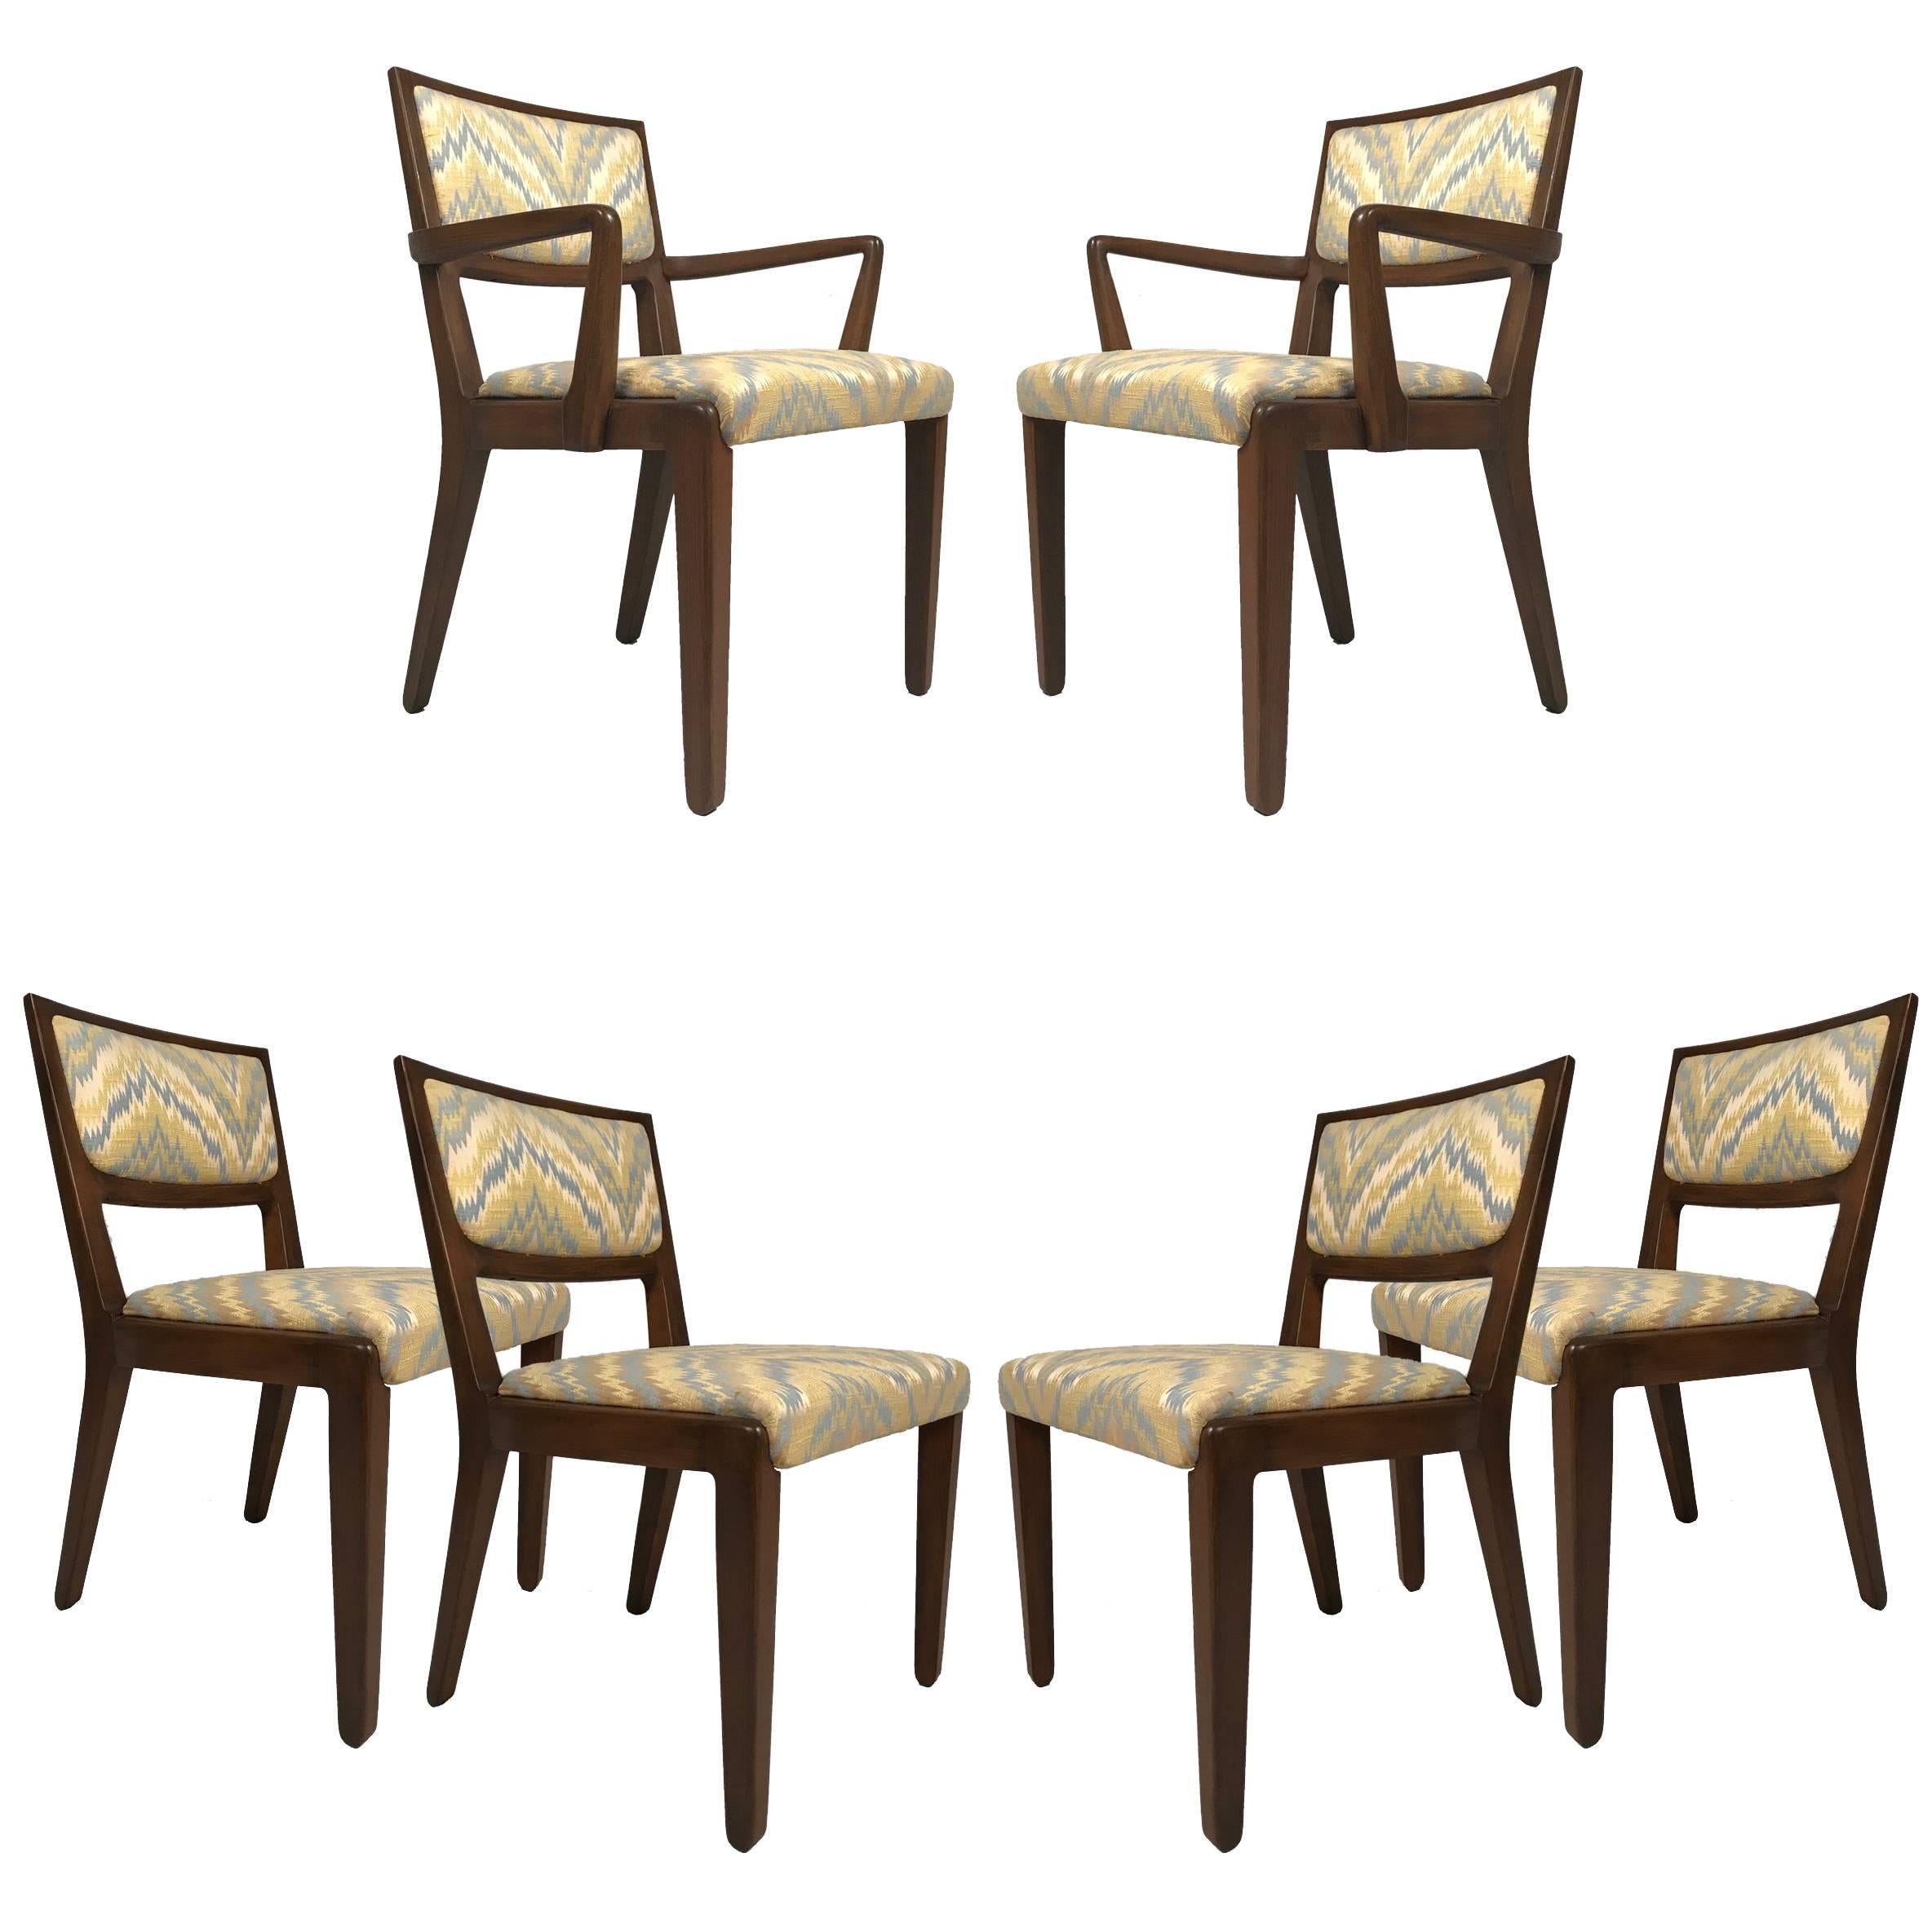 Set of 6 Edward Wormley for Drexel Dining Chairs with Chevron Upholstery